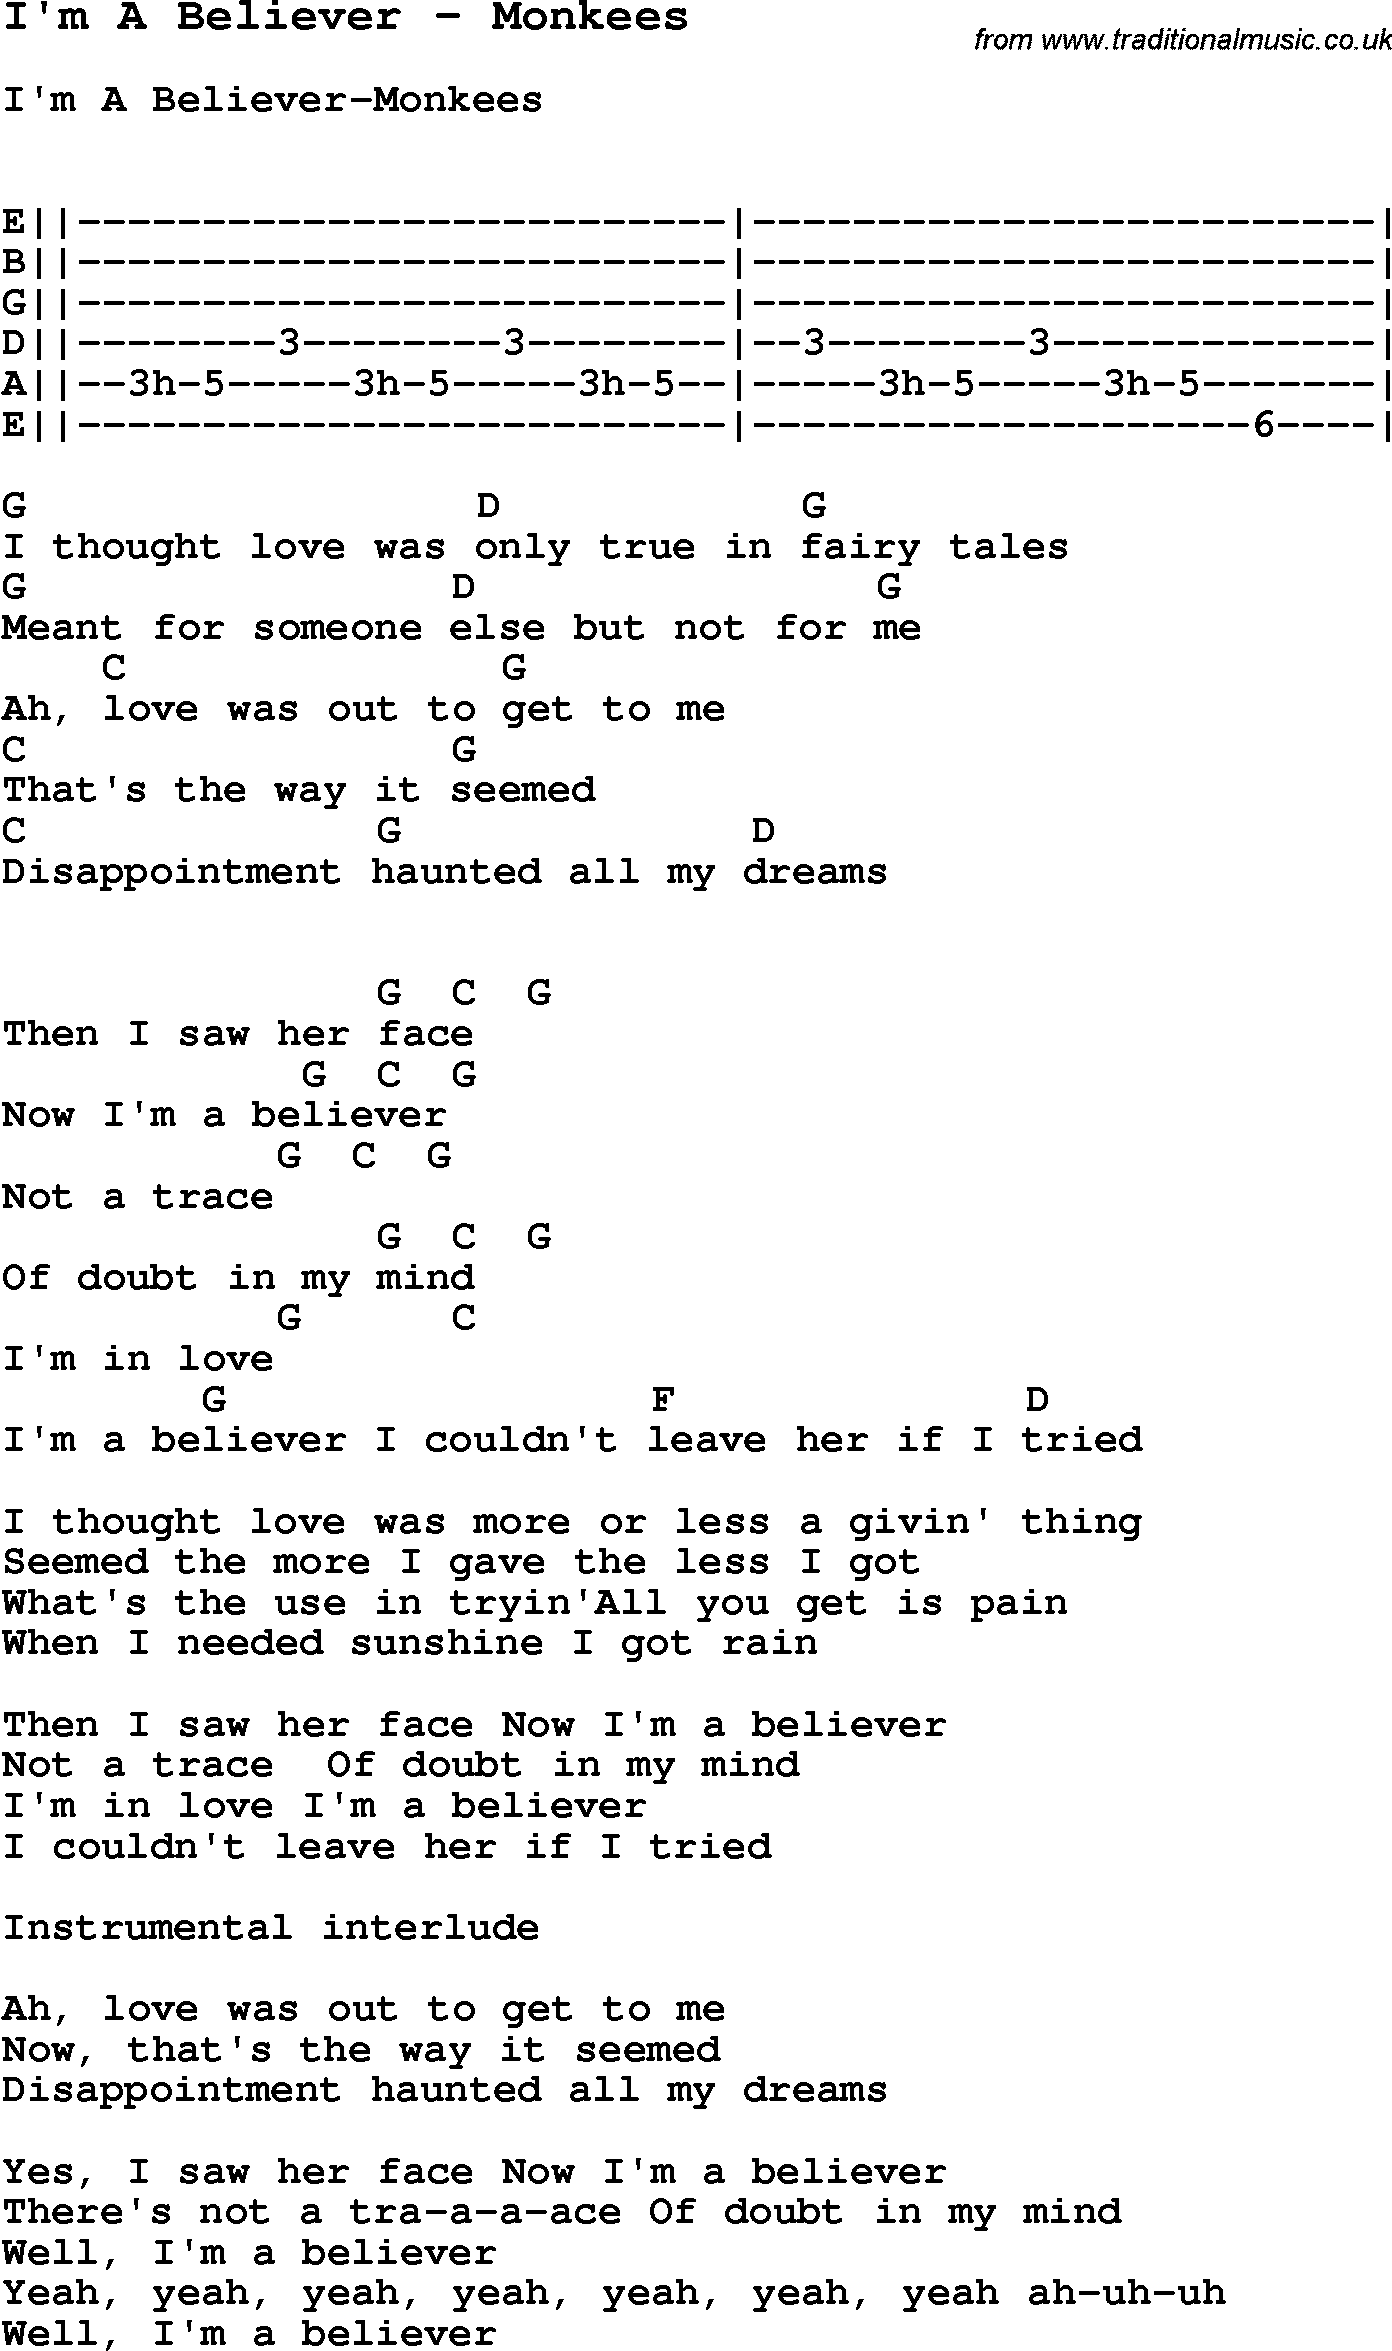 Song I'm A Believer by Monkees, with lyrics for vocal performance and accompaniment chords for Ukulele, Guitar Banjo etc.